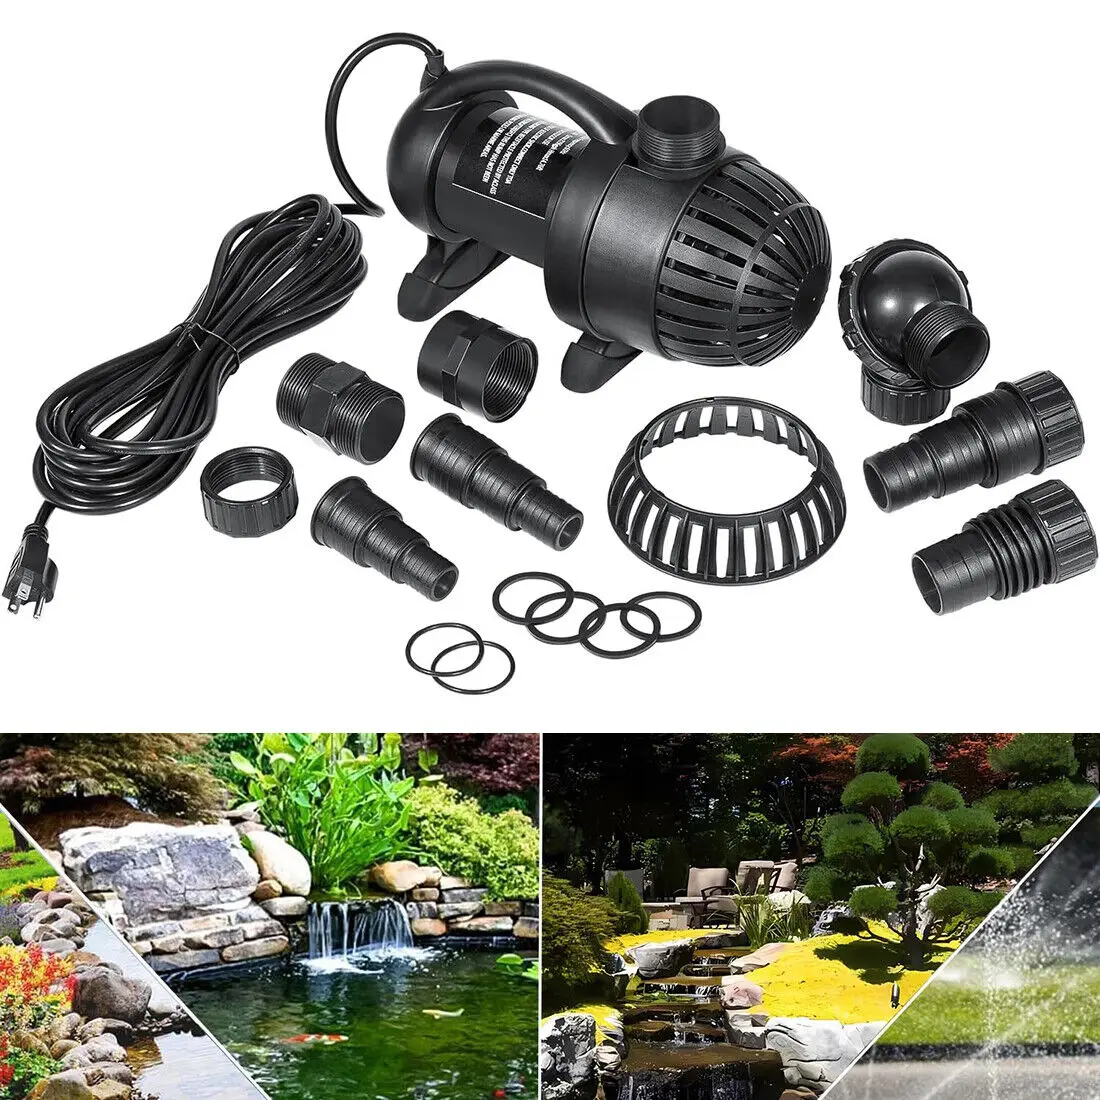 

91018 3000 GPH Submersible Water Pump for Pond Waterfall Fountain Hydroponics Aquarium Skimmers Filter System Fish Tank Koi Pool